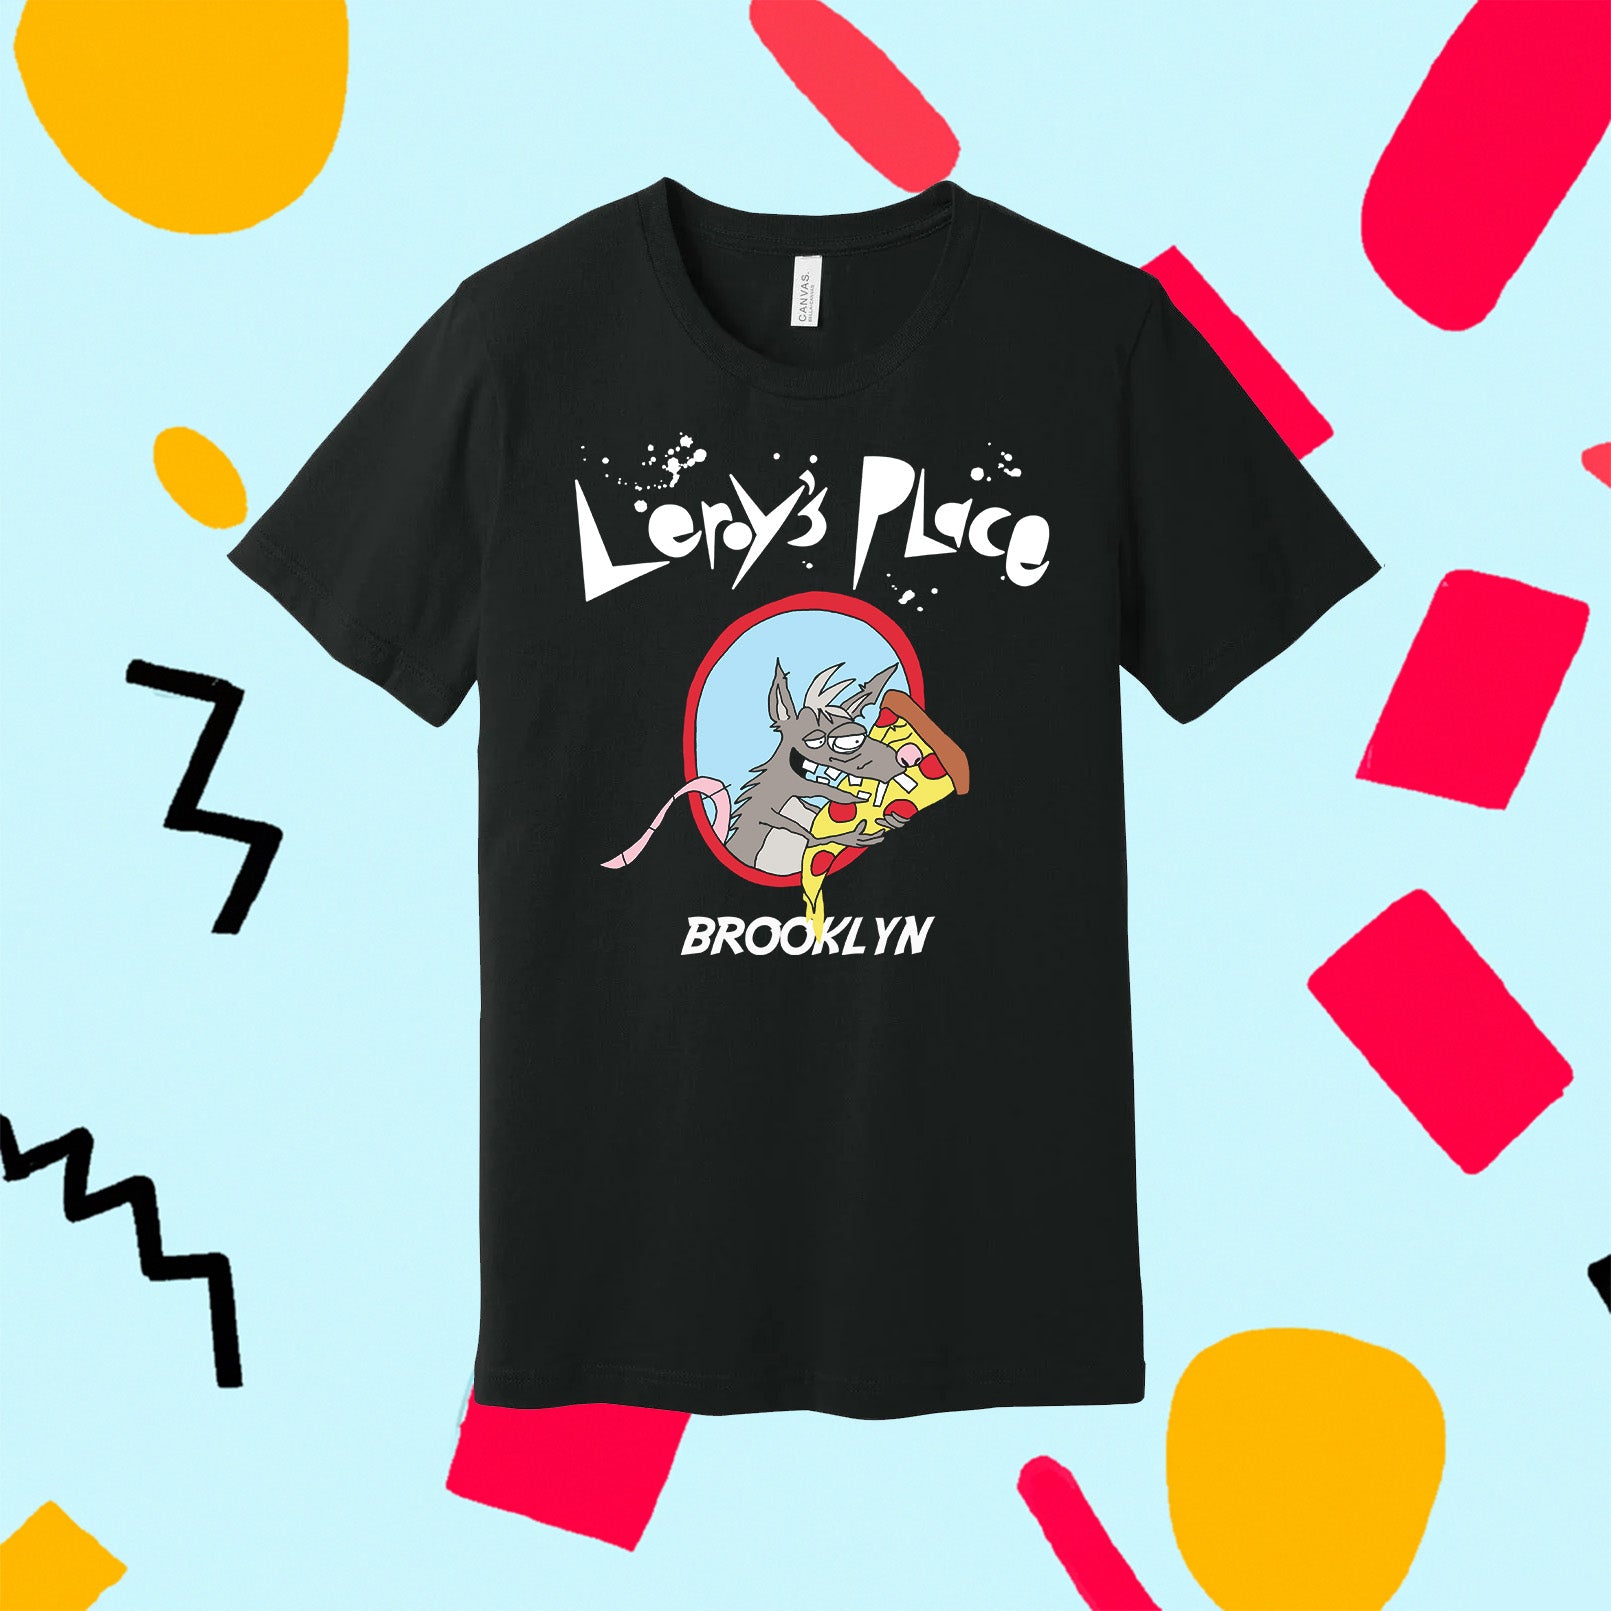 Pizza Rat - Illustrated Leroy's Place Tee Shirt